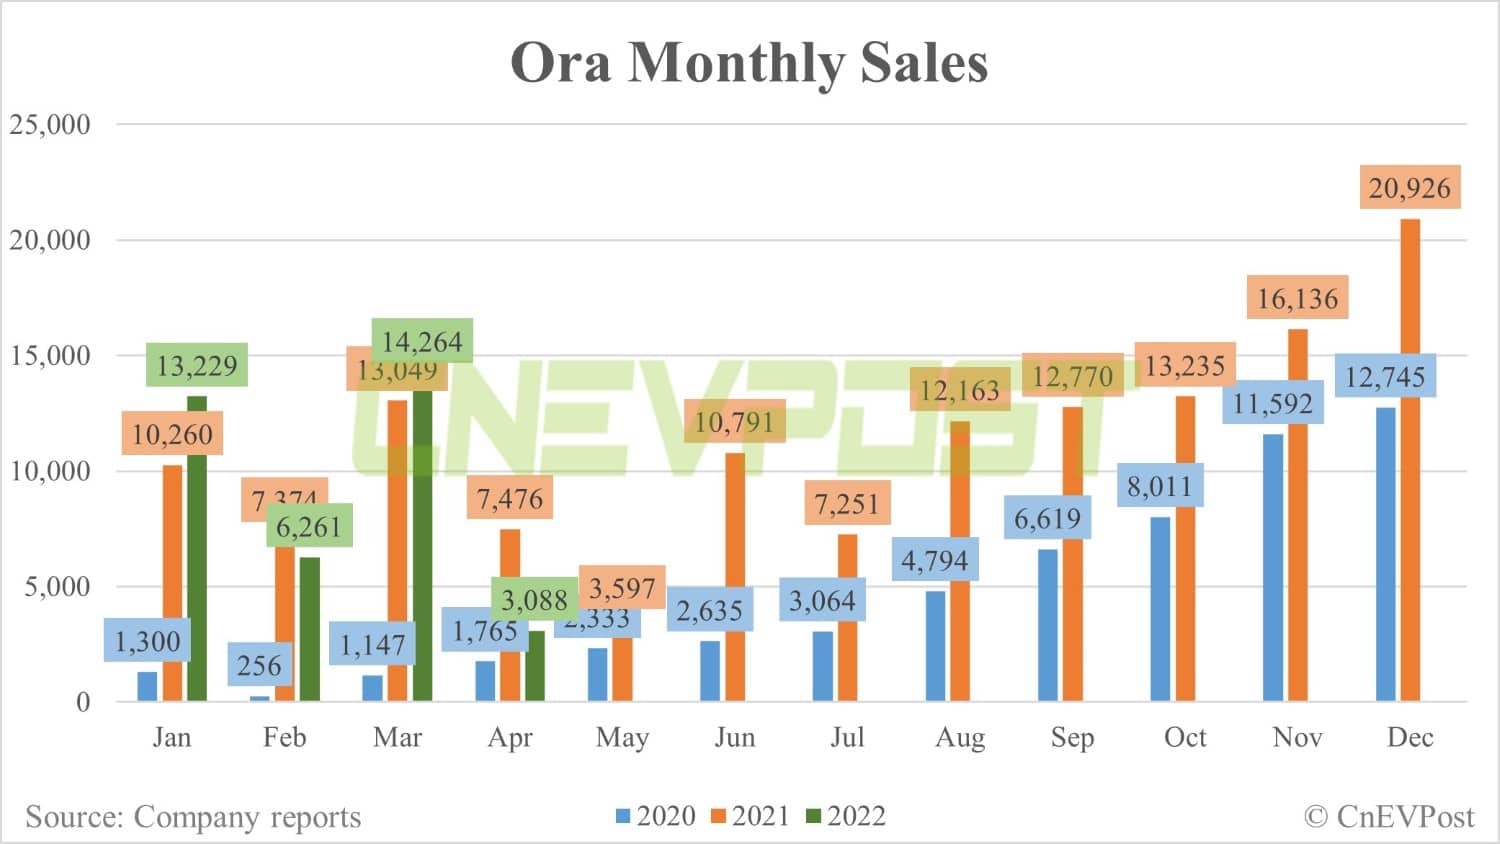 Great Wall Motor's Ora brand sells 3,088 vehicles in April, down 78% from March-CnEVPost